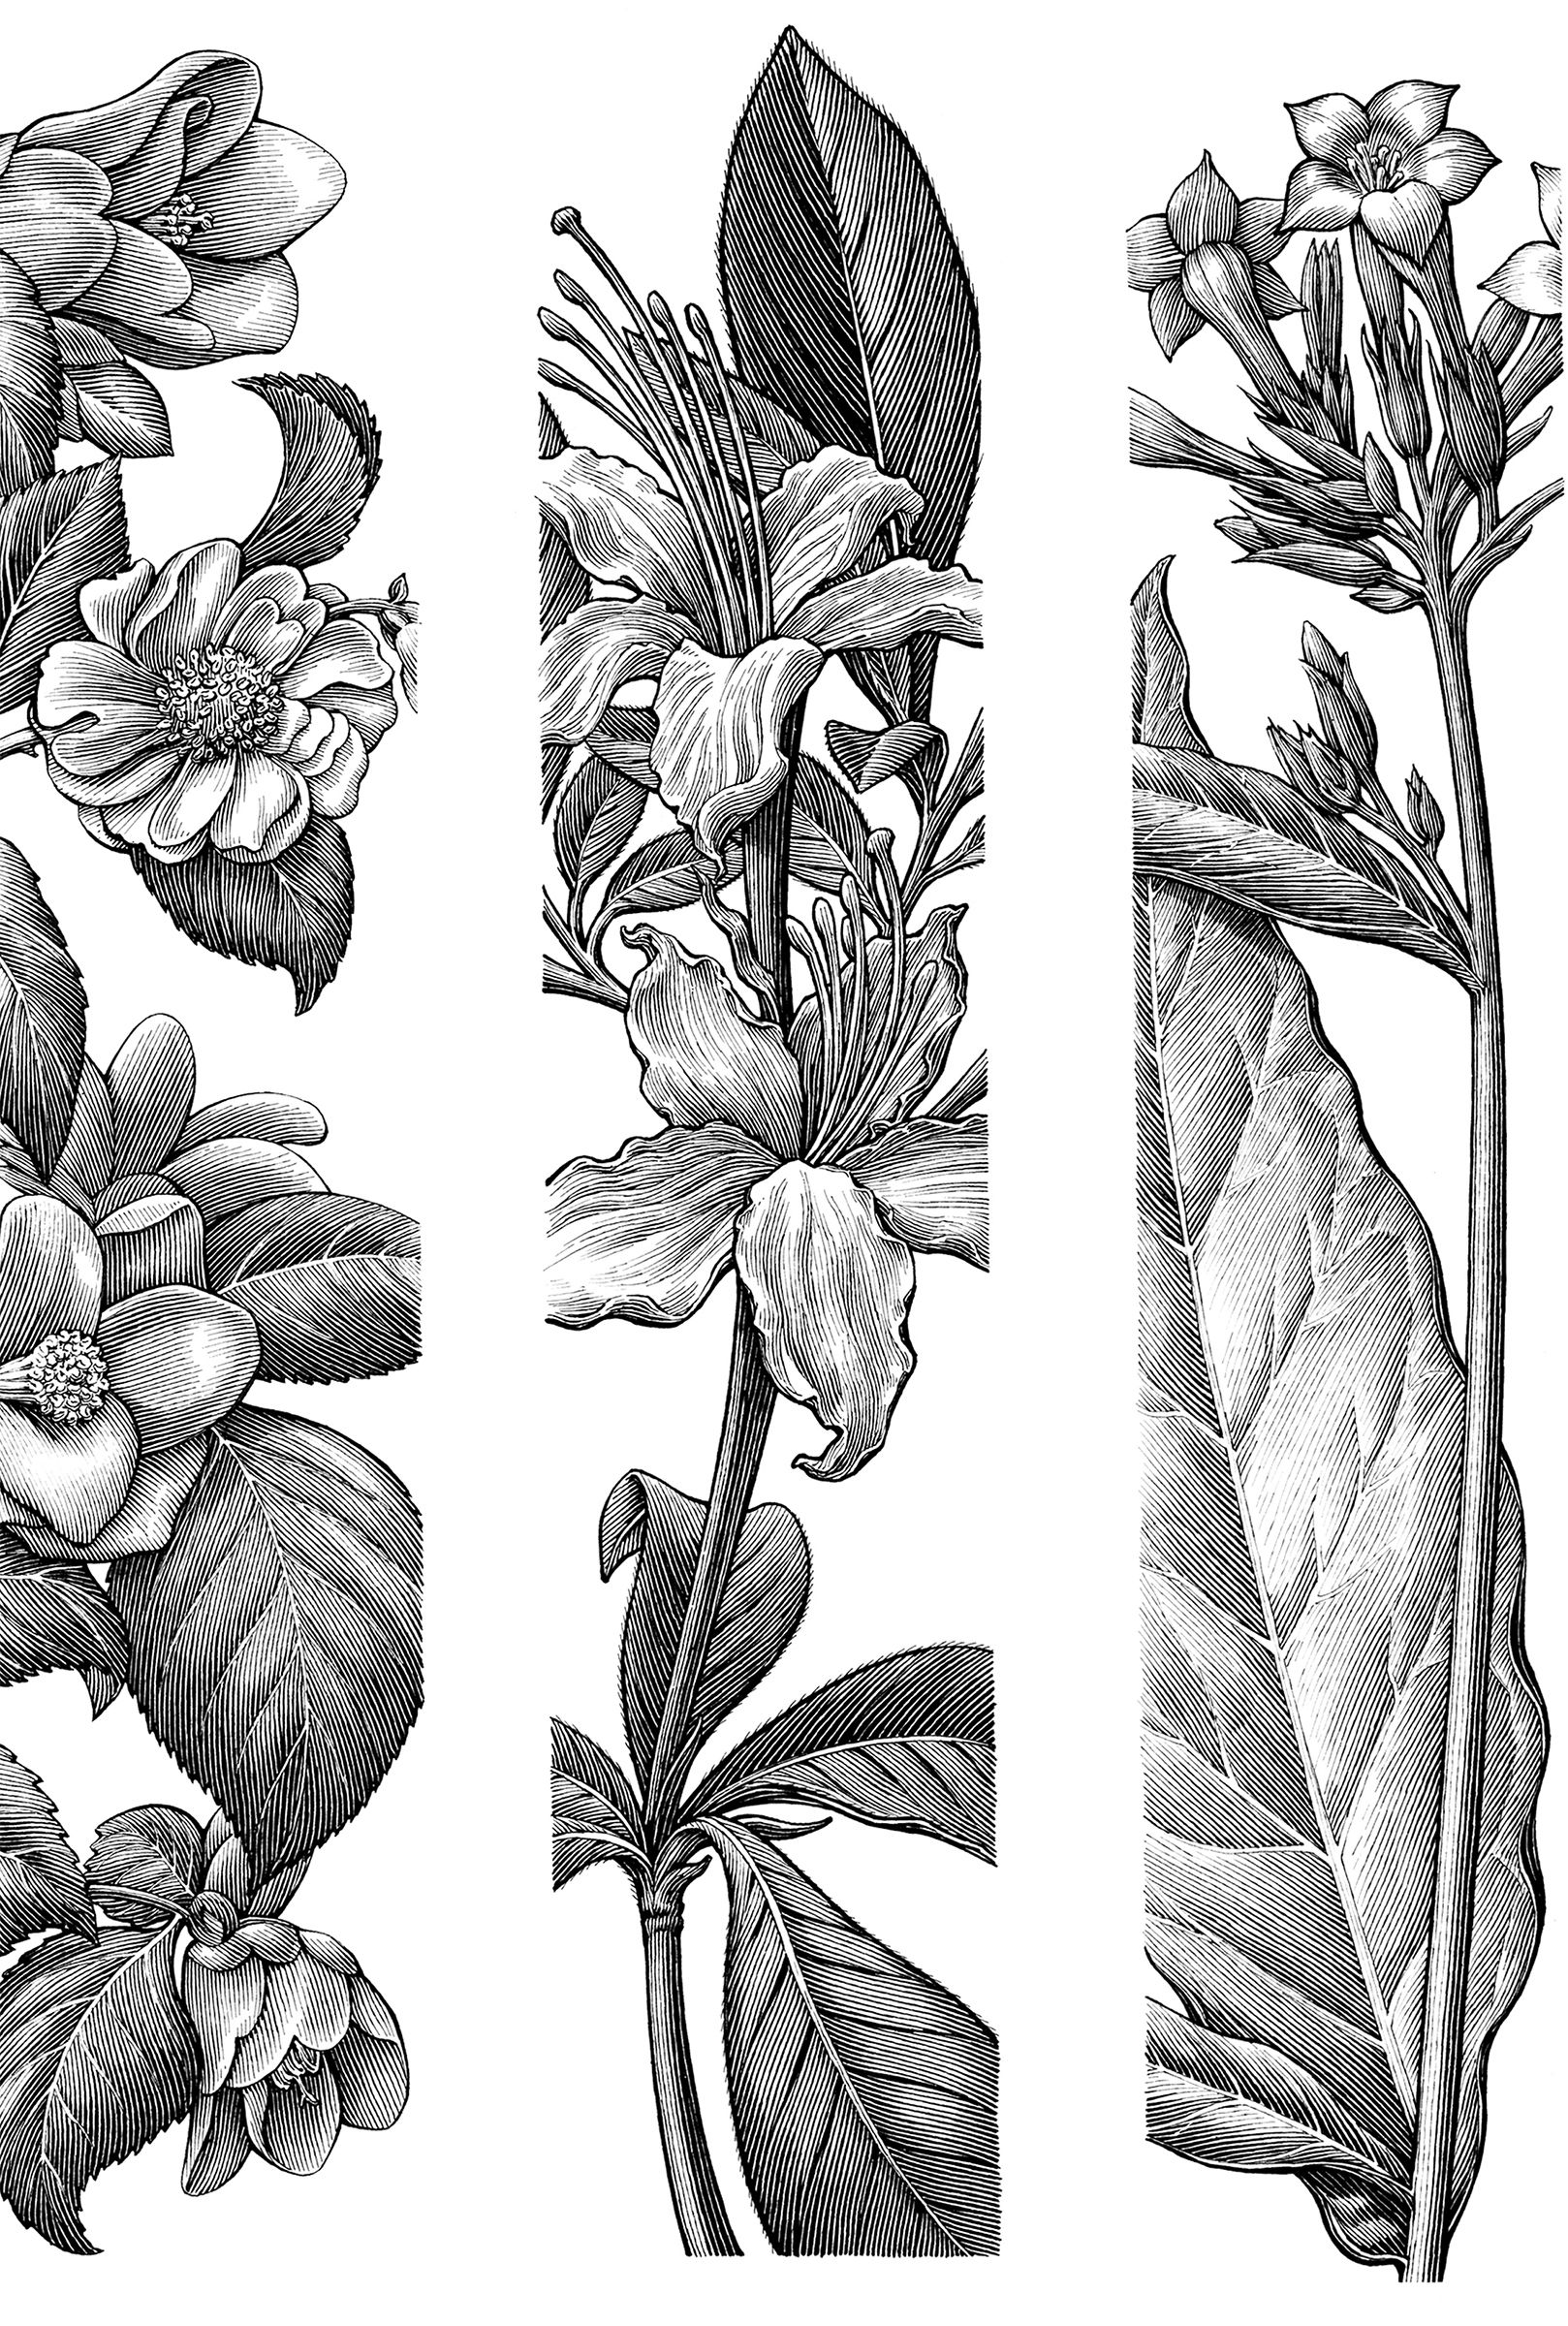 Jardin Botanique Montreal Best Of Check Out This Behance Project "bronx Botanical Garden